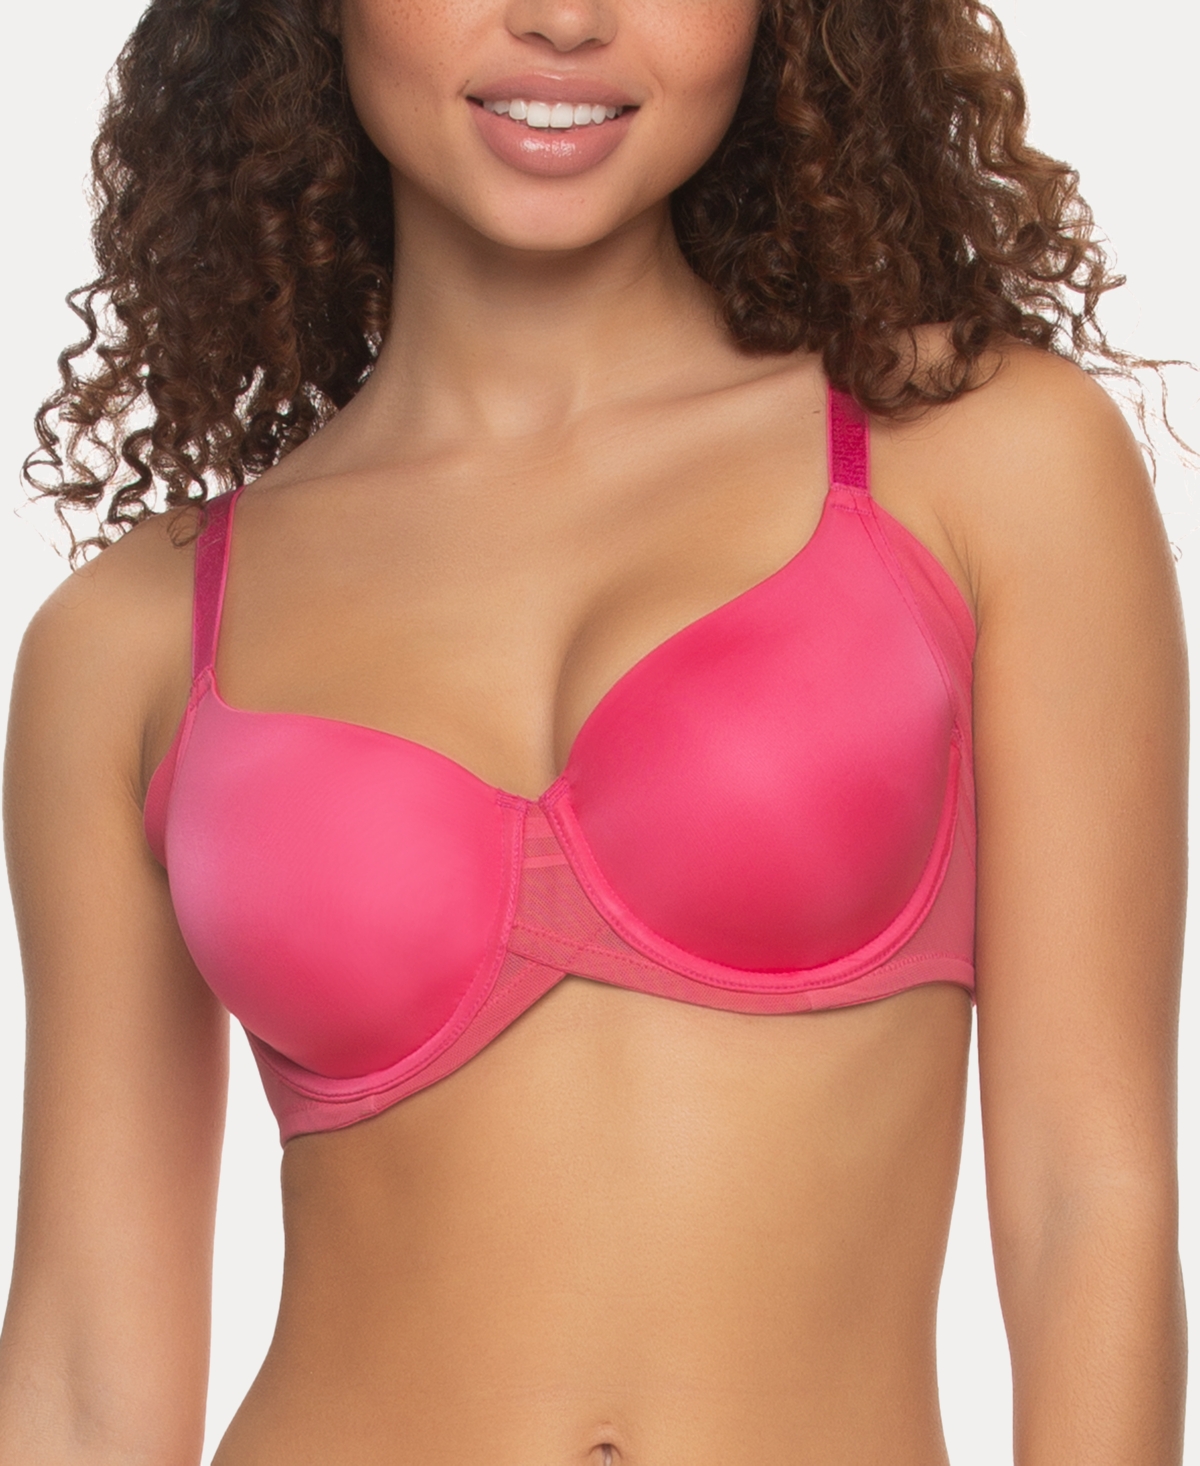 Paramour Women's Marvelous Side Smoother Bra - Fuchsia Rose 40DDD